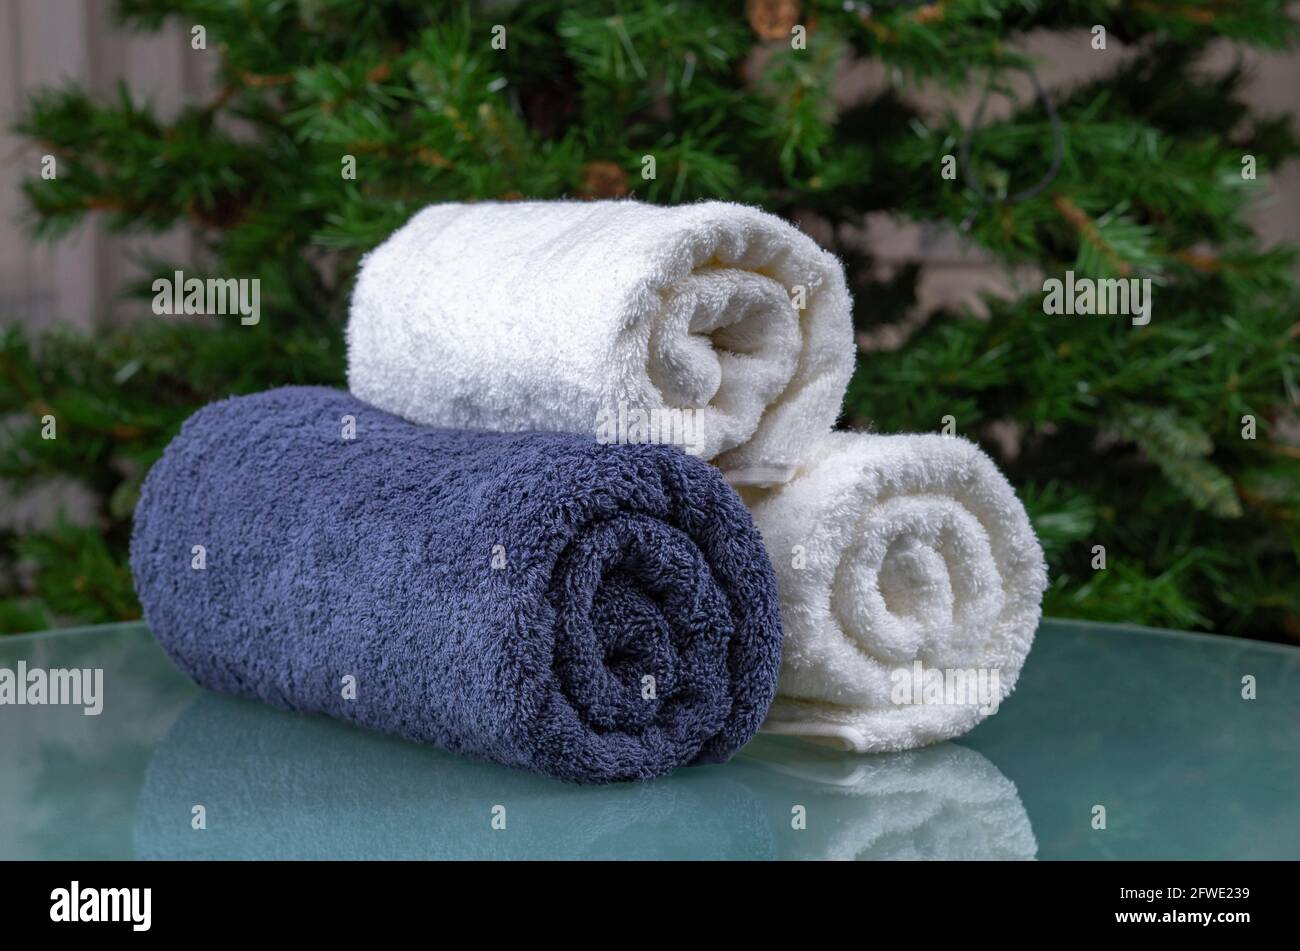 https://c8.alamy.com/comp/2FWE239/towels-close-up-of-rolled-white-and-blue-fluffy-towels-beauty-and-massage-spa-concept-luxury-hotel-2FWE239.jpg